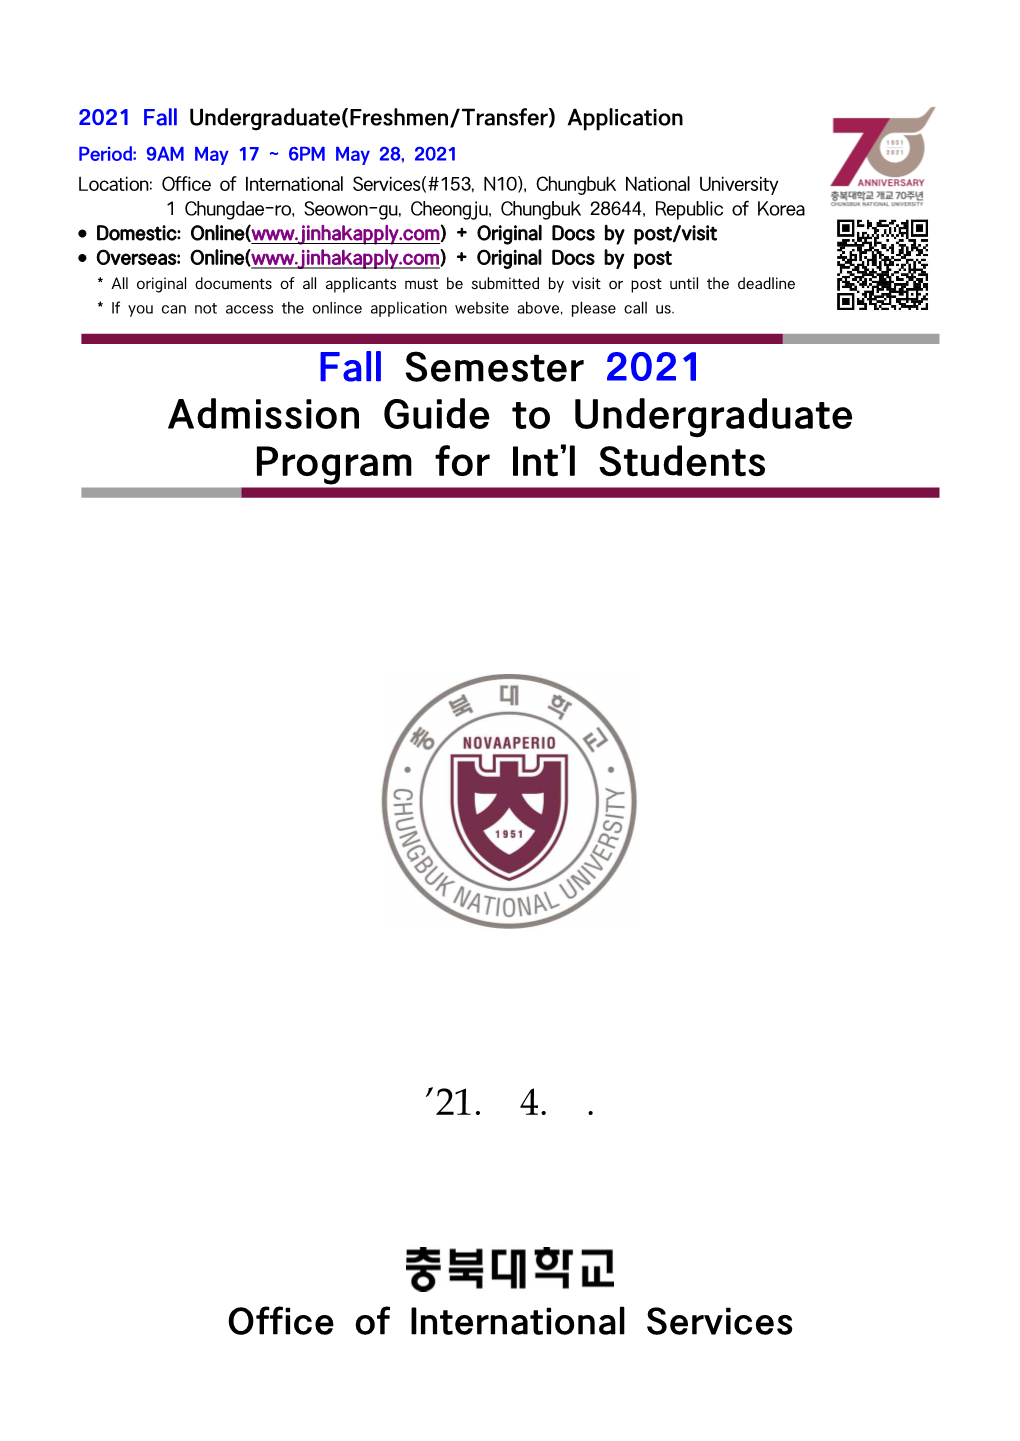 Fall Semester 2021 Admission Guide to Undergraduate Program for Int'l